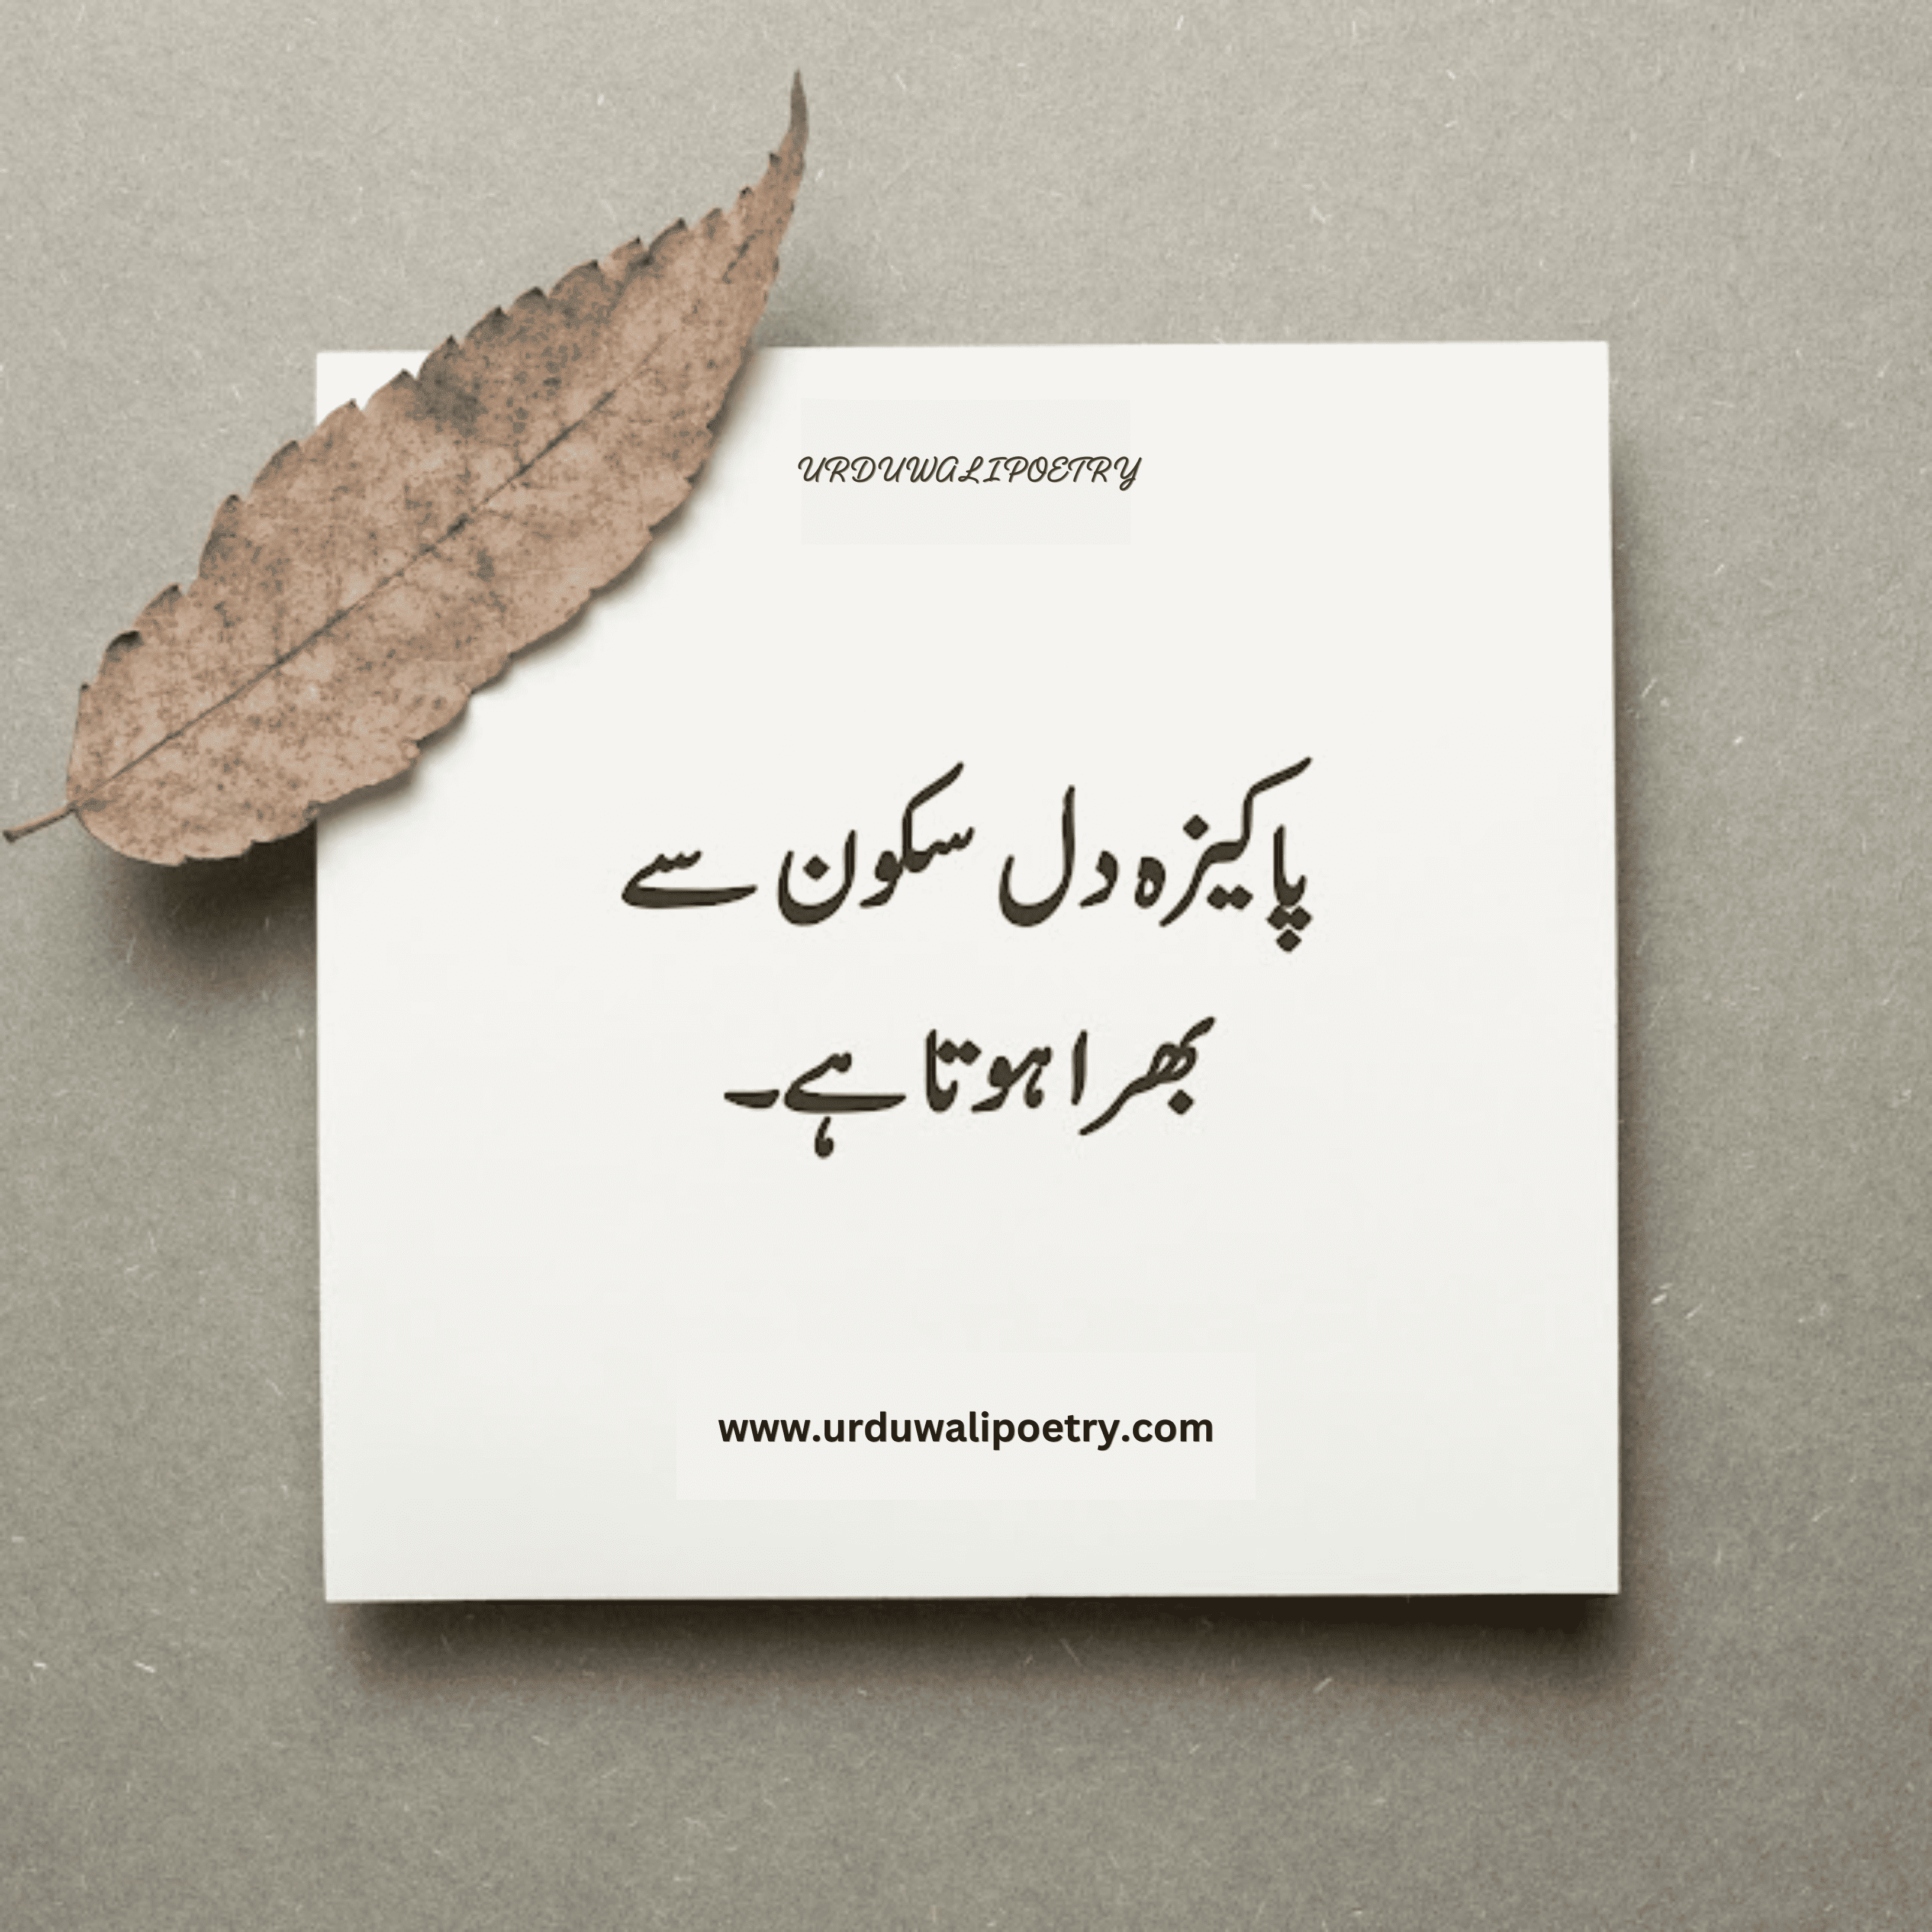 Motivational Quotes in Urdu About Life | Wisdom Quotes | Deep Quotes